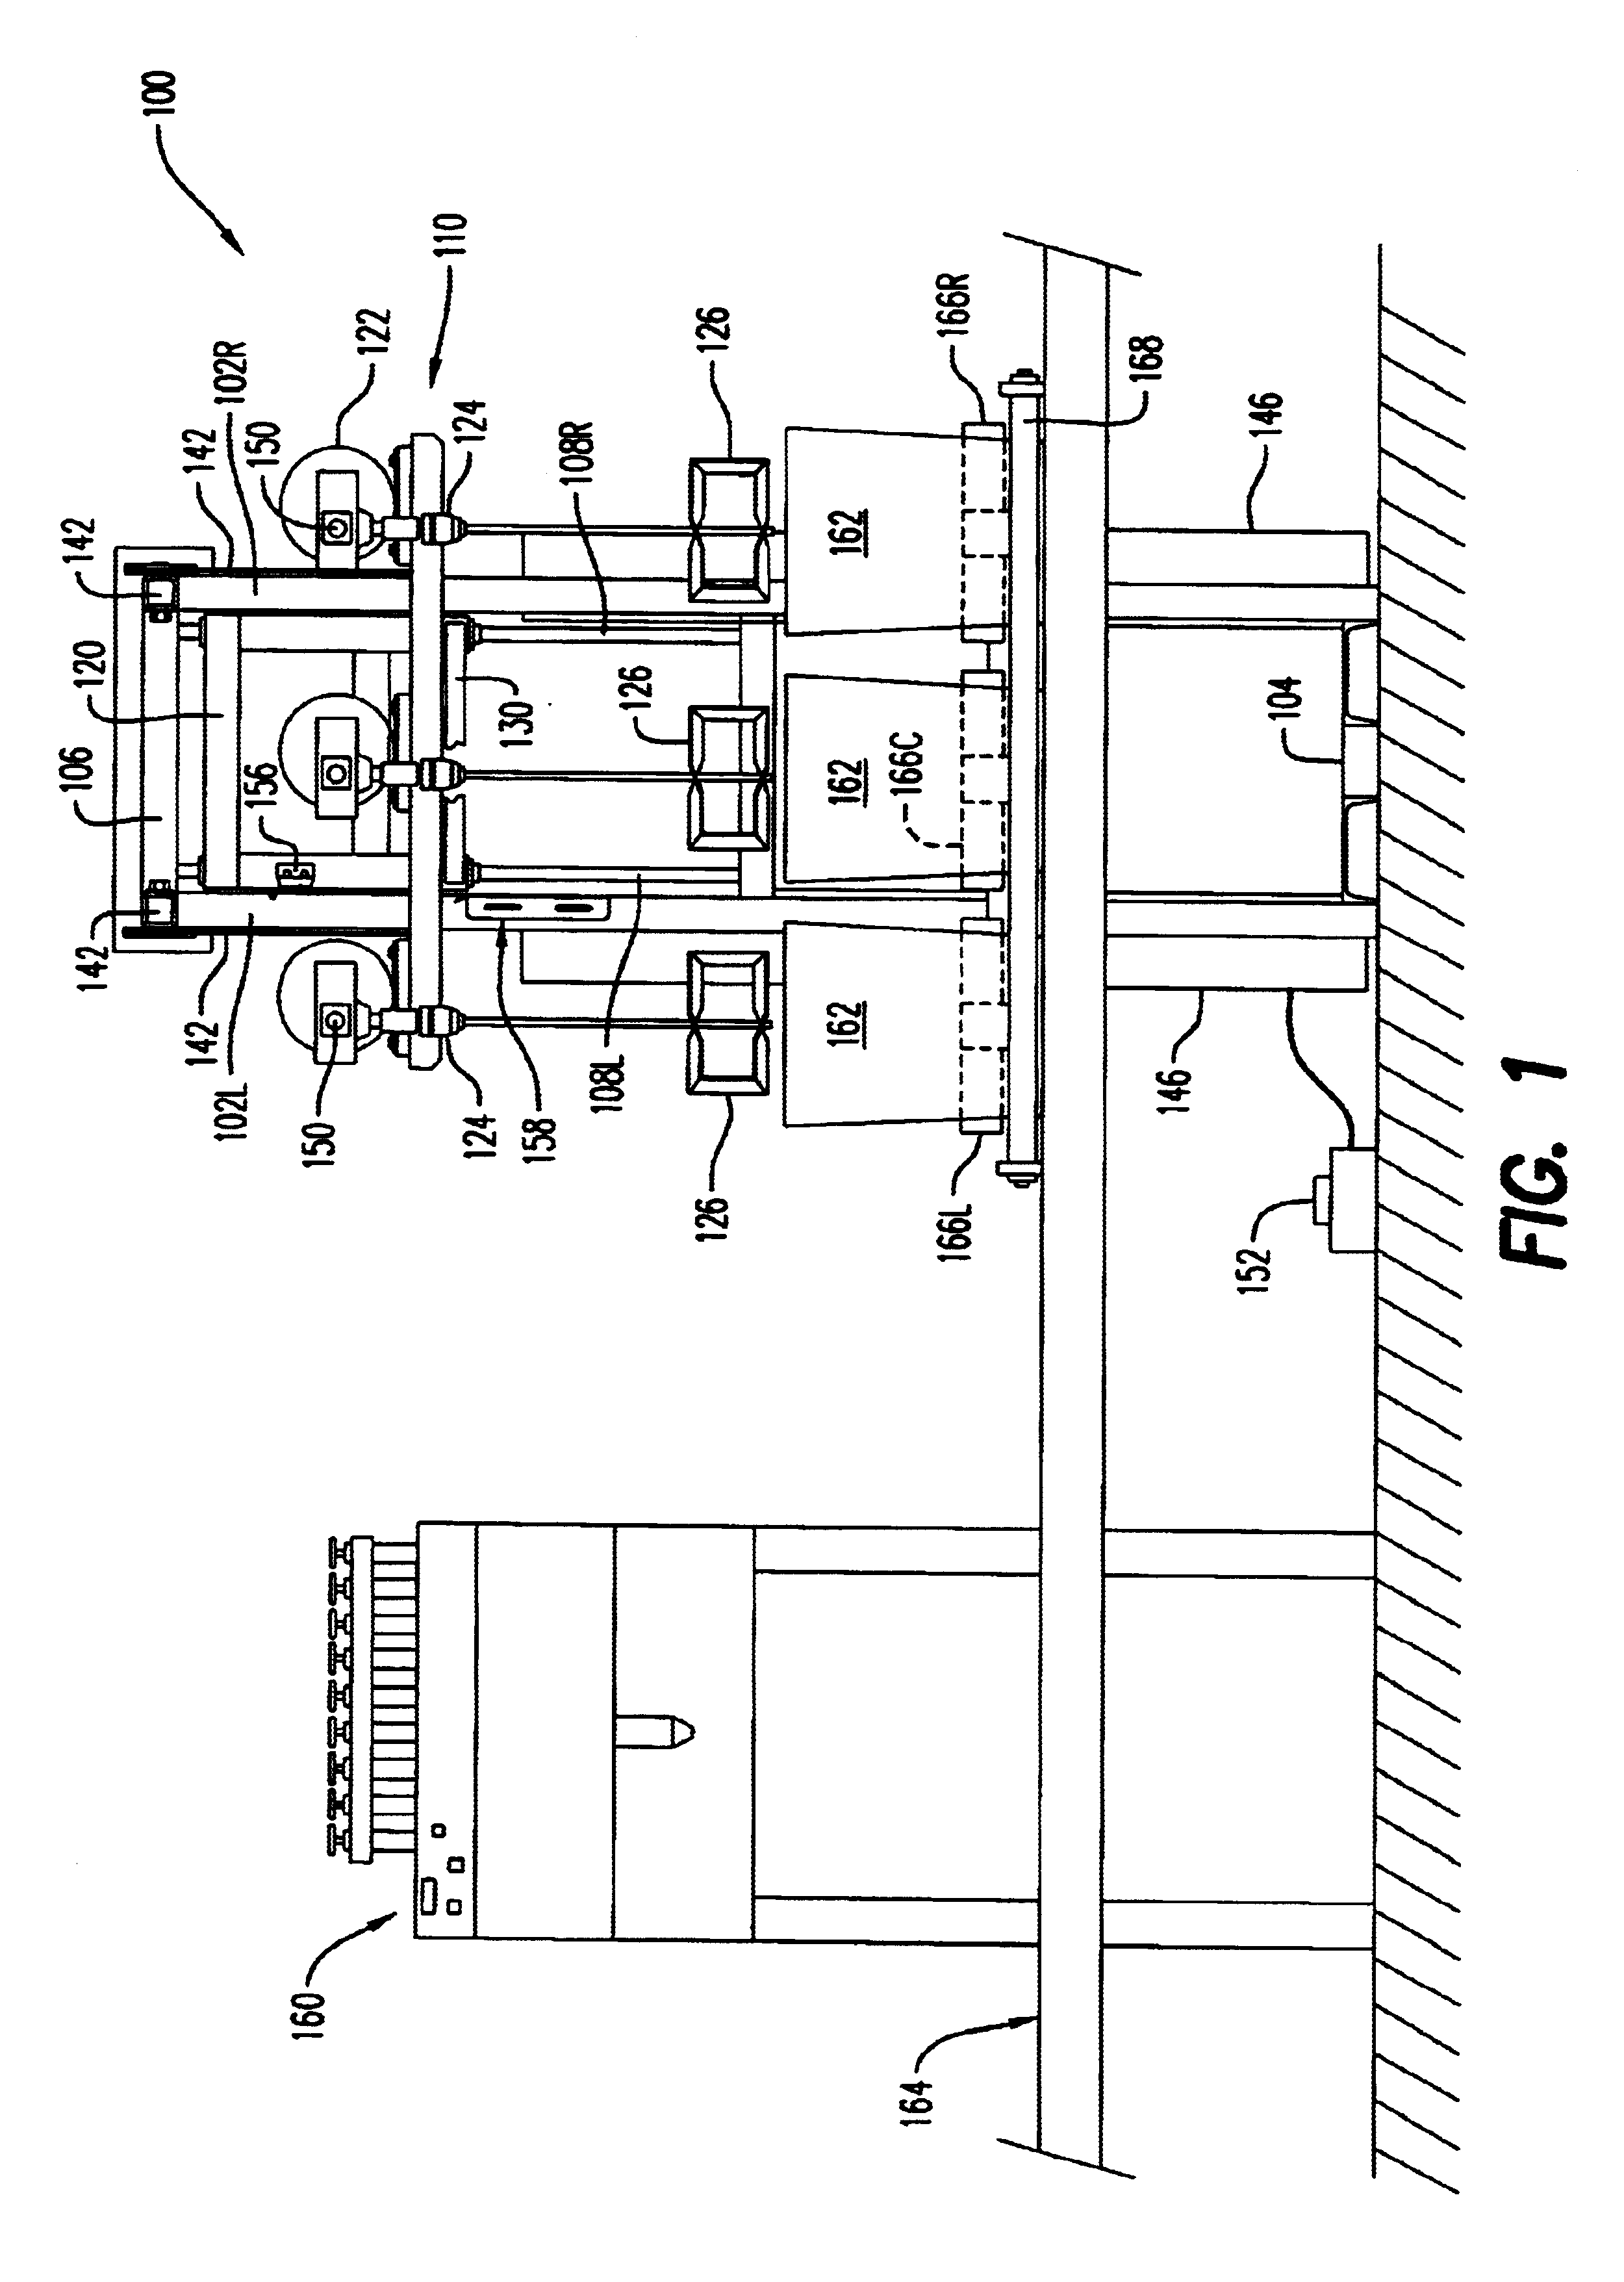 Stirring apparatus for large containers